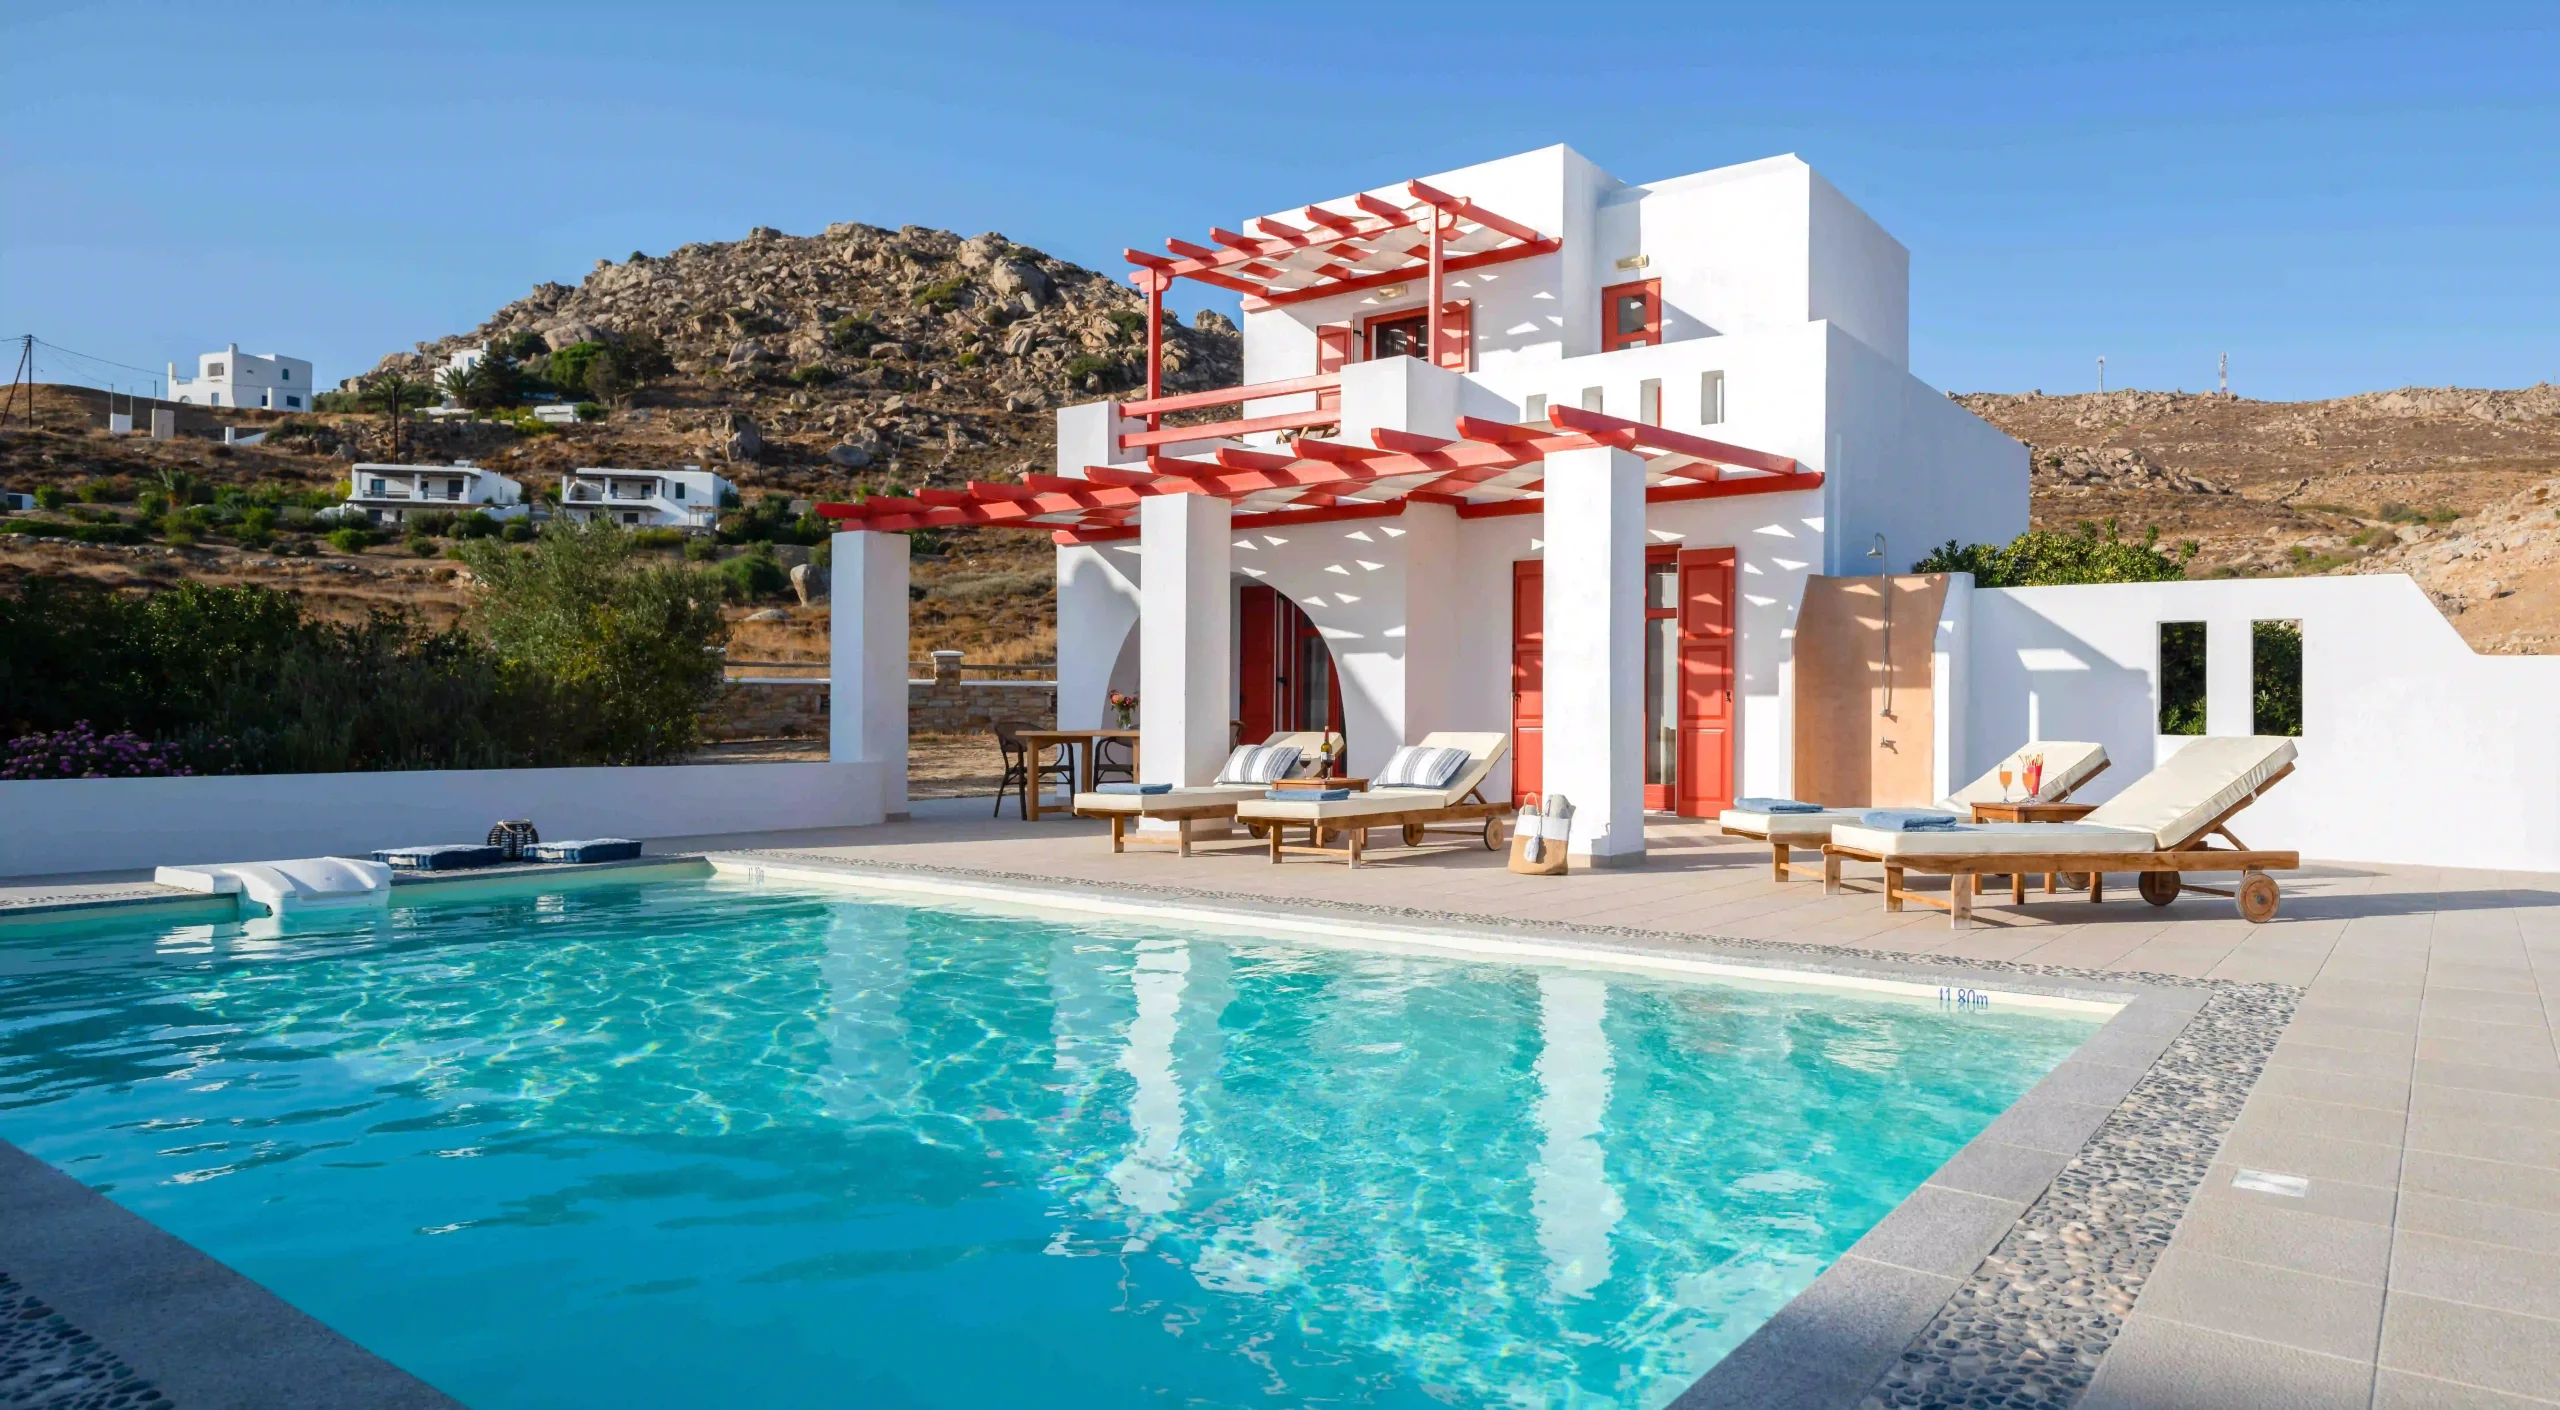 Luxury villas Dunes patio and private pool equipped with sunbeds at Natura villas in Naxos